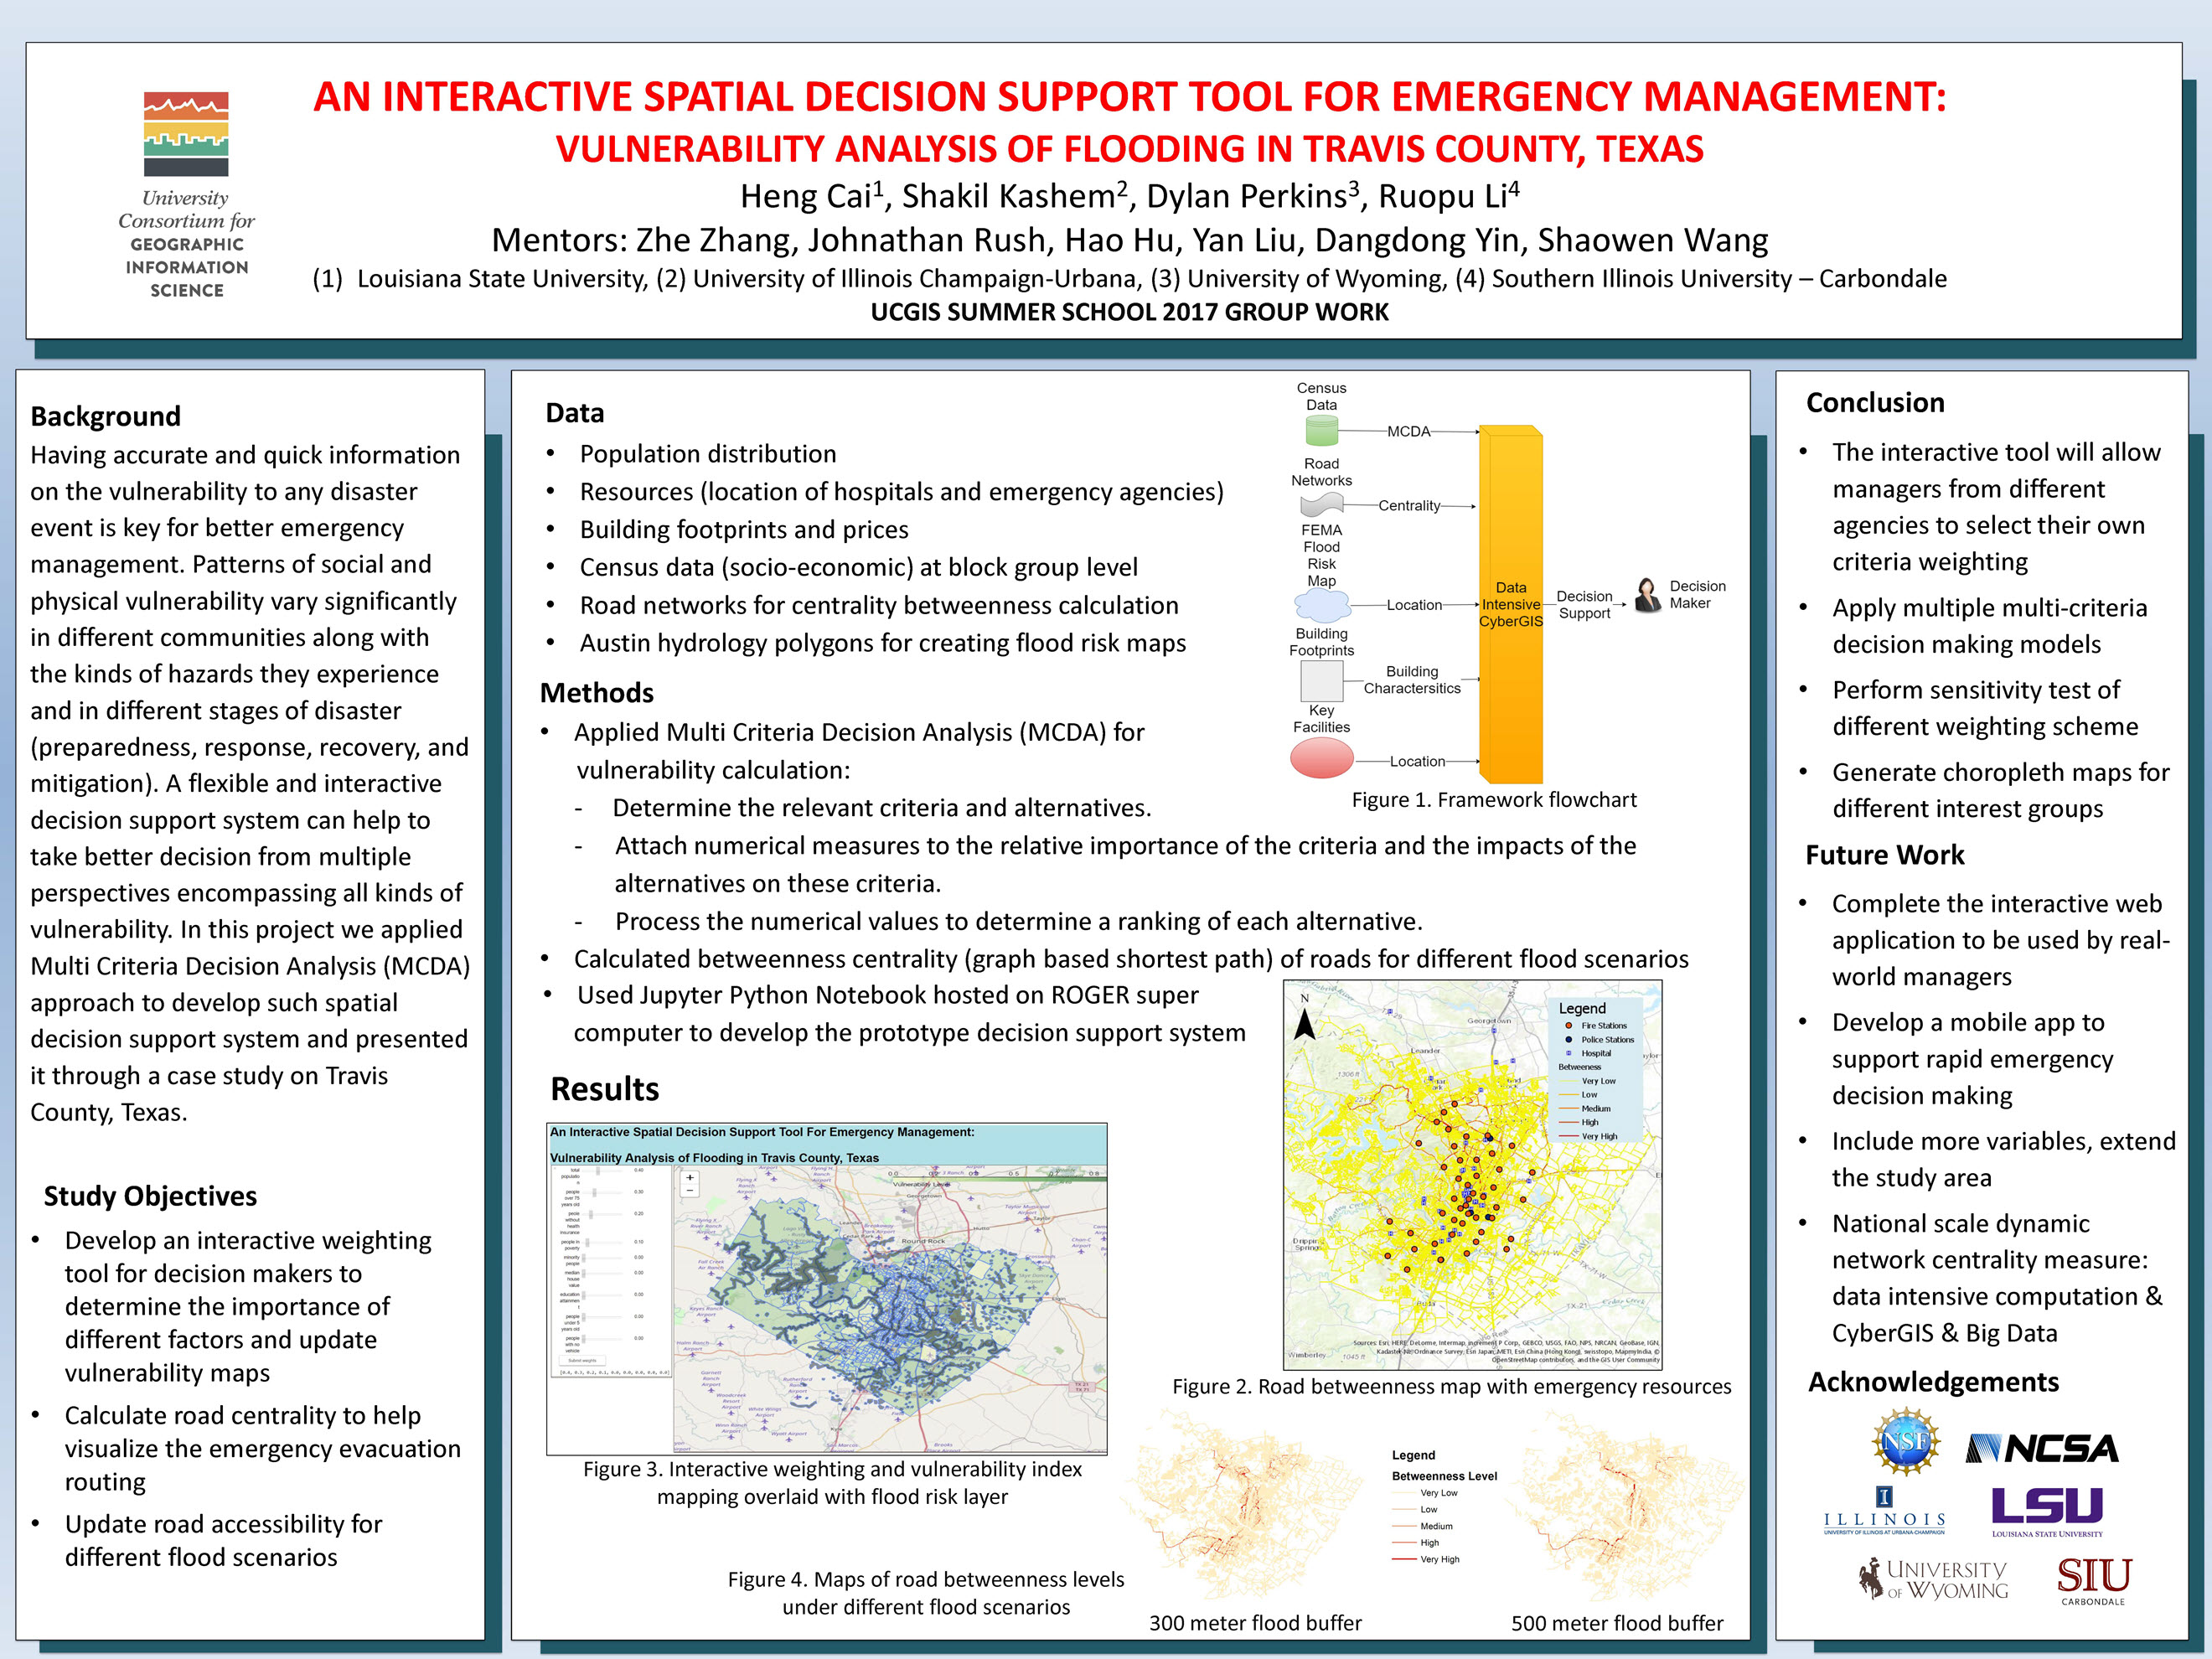 An Interactive Spatial Decision Support Tool for Emergency Management: Vulnerability Analysis of Flooding in Travis County, Texas